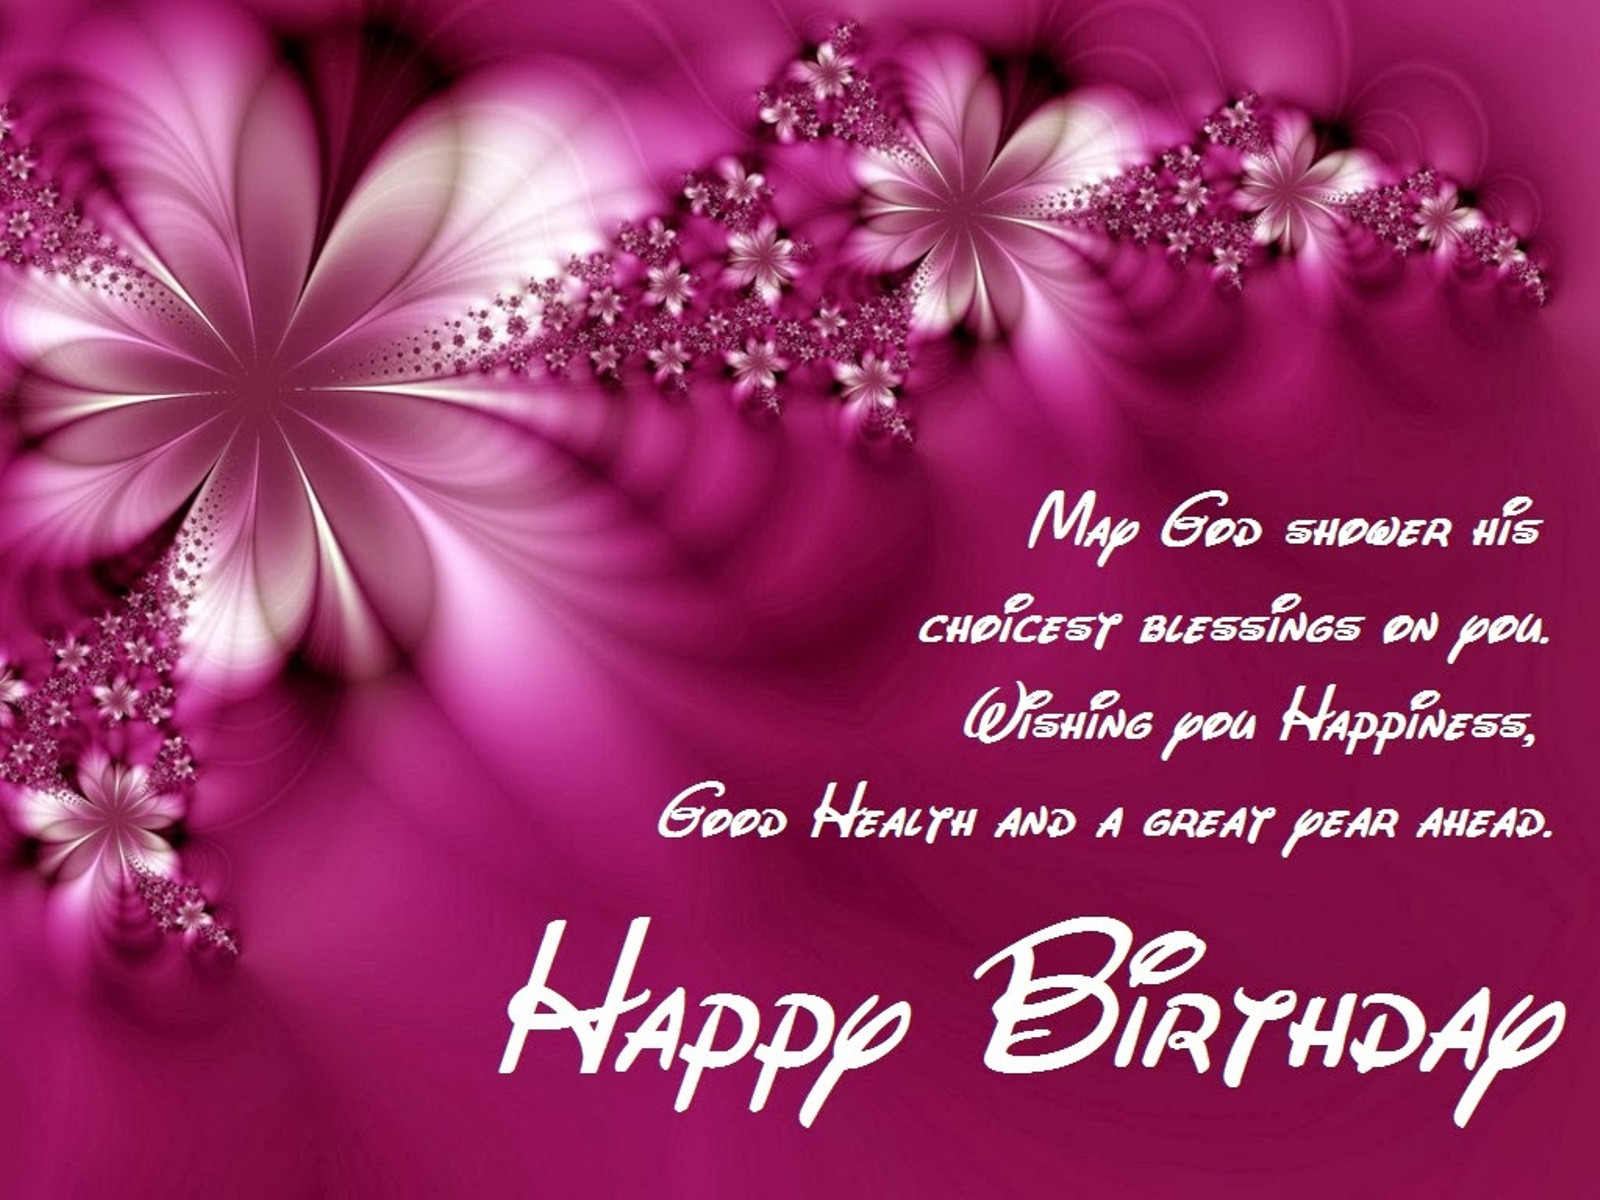 Happy Birthday Images And Quotes
 Happy Birthday Quotes QuotesGram